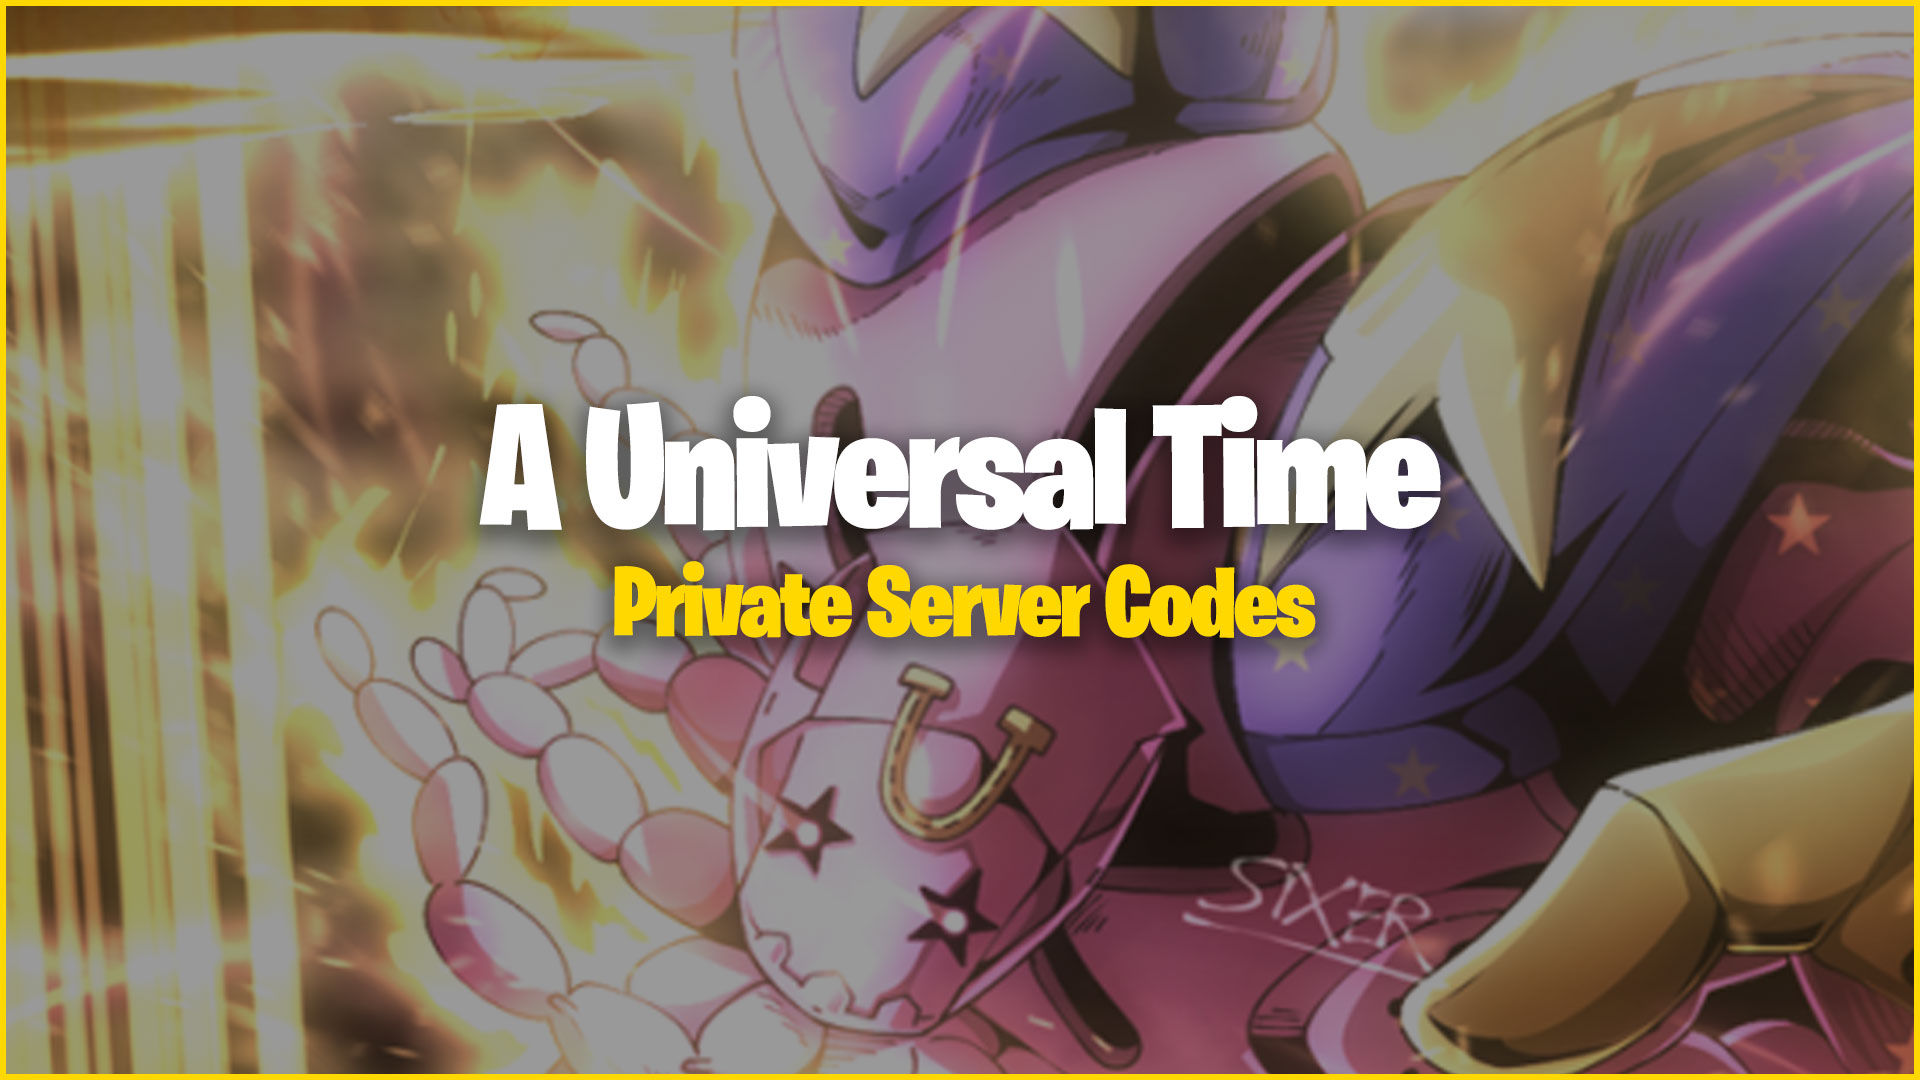 NEW* REROLL CODES AND FREE PRIVATE SERVER CODES!!